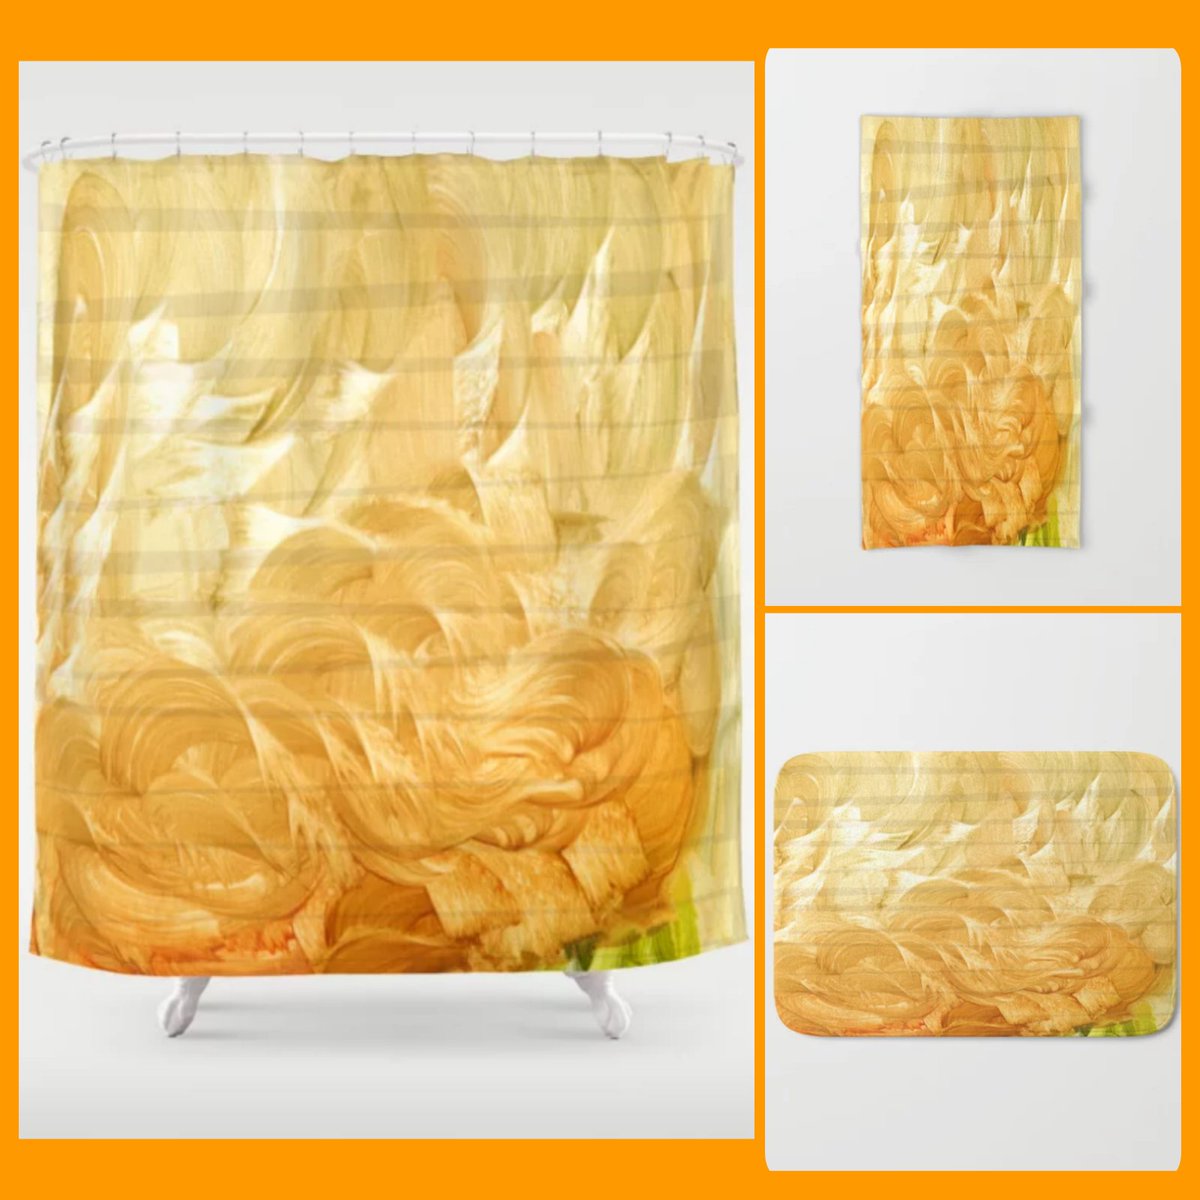 Light And Protection Shower Curtain~Refresh your Decor~ #artfalaxy #art #bedroom #pillows #homedecor #society6 #Society6max #swirls #modern #trendy #accessories #accents #shower #bath #comforters #green #yellow #golden #orange #peach society6.com/product/light-…